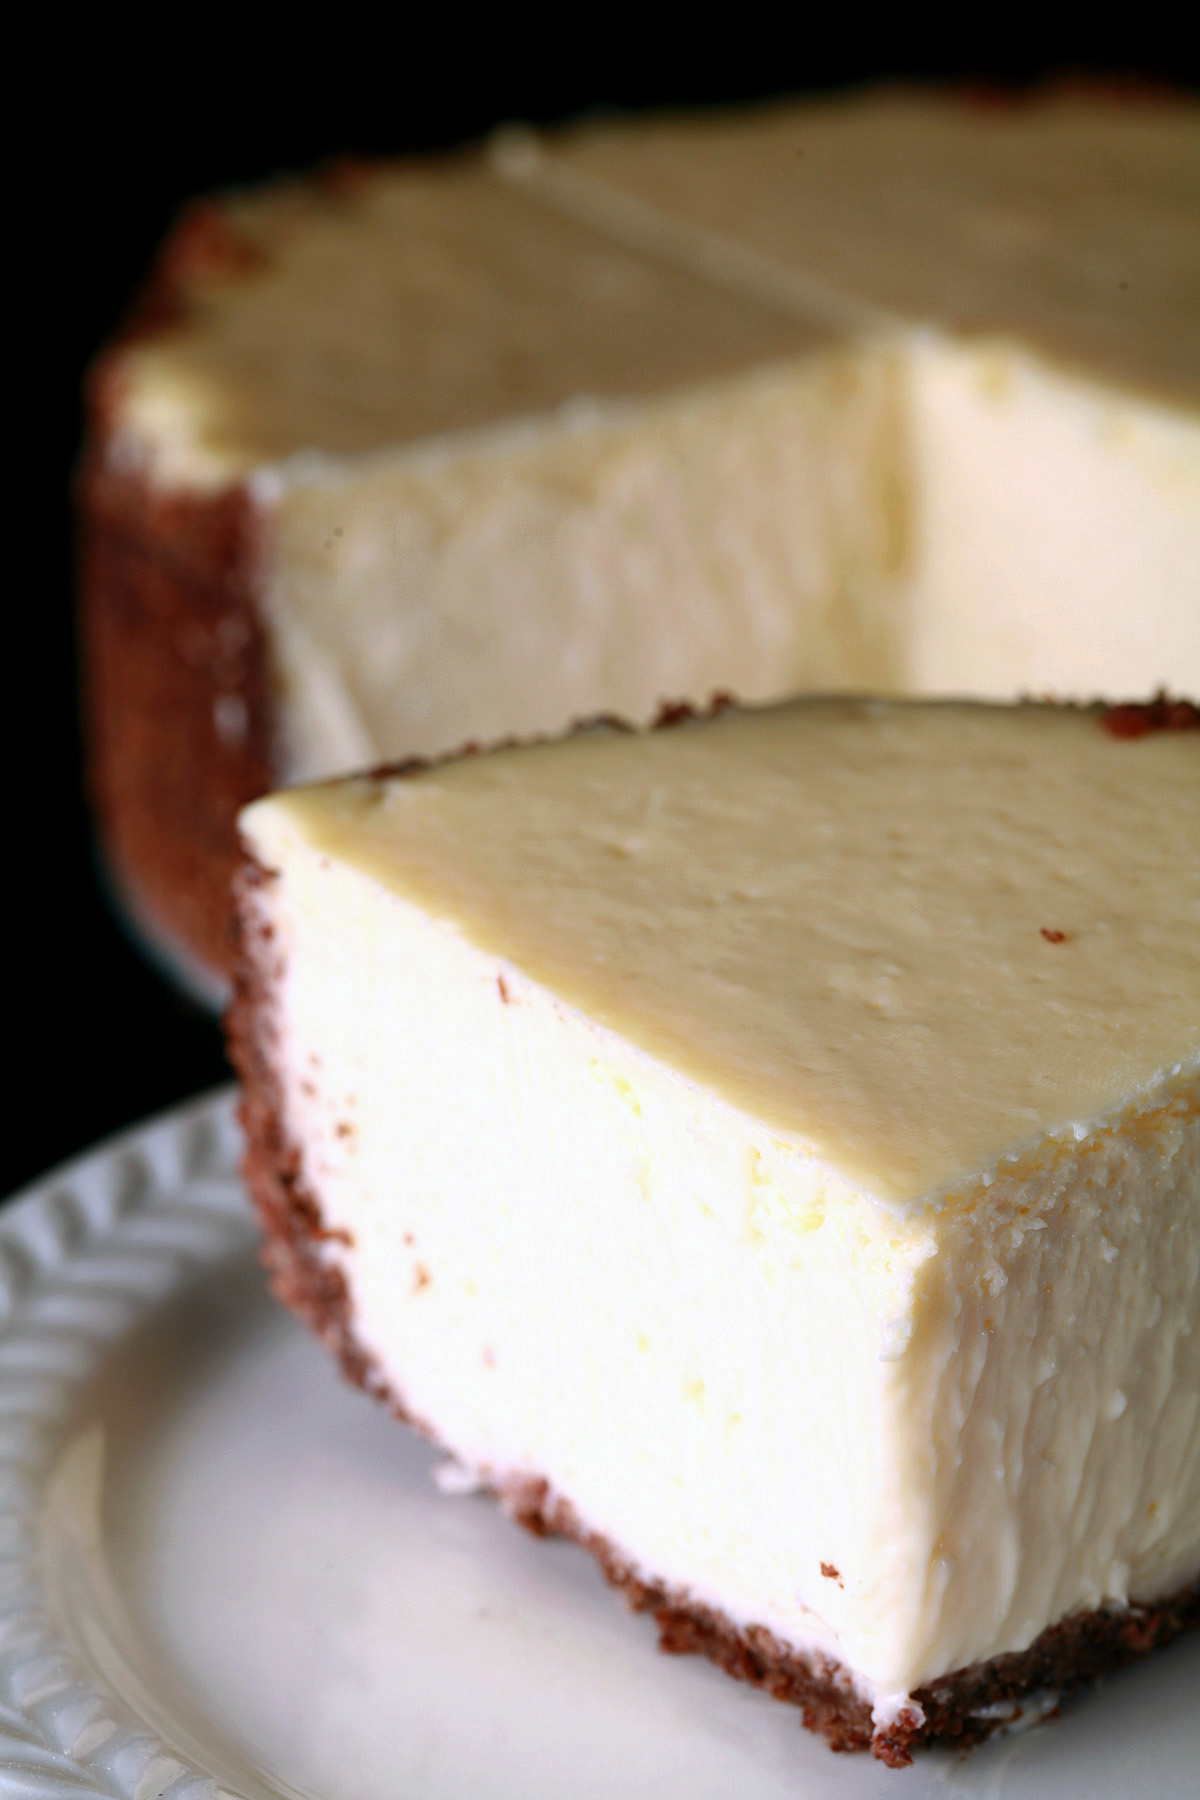 A small 6" low carb cheesecake with a slice cut out of it.